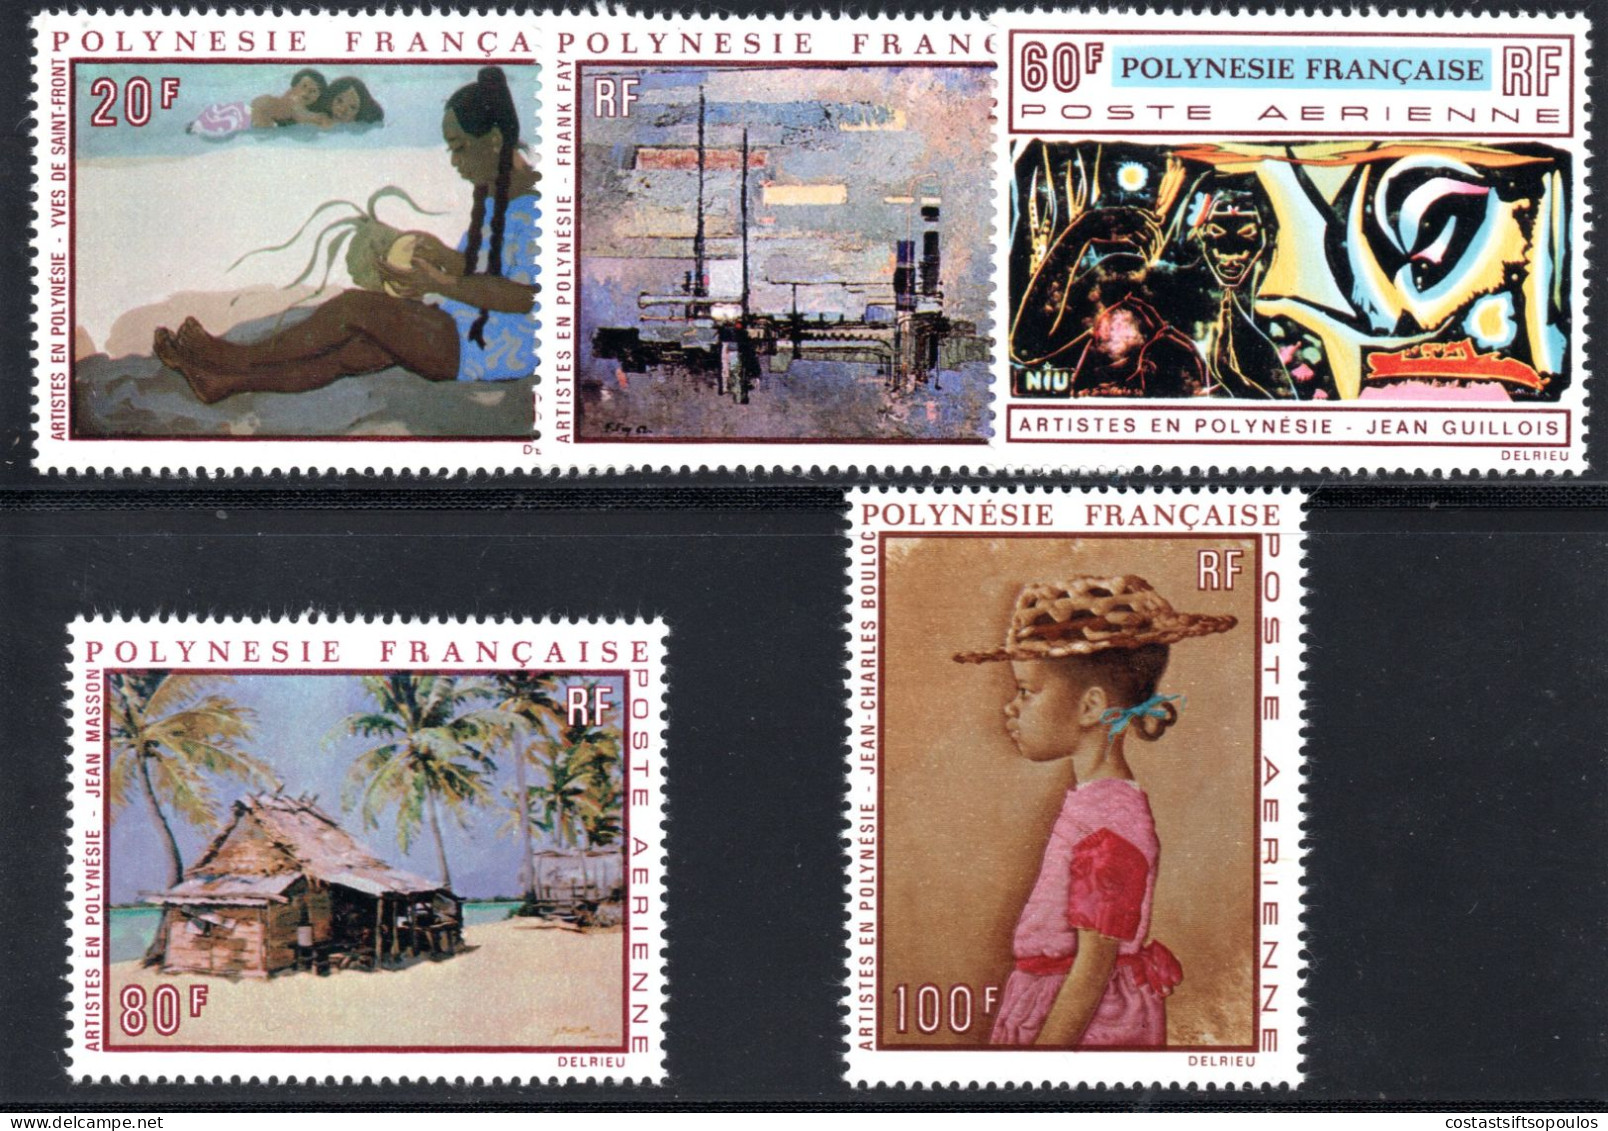 2047. POLYNESIA. 1970 PAINTINGS Y.T.A40-A44 MNH. VERY FINE AND FRESH. - Unused Stamps